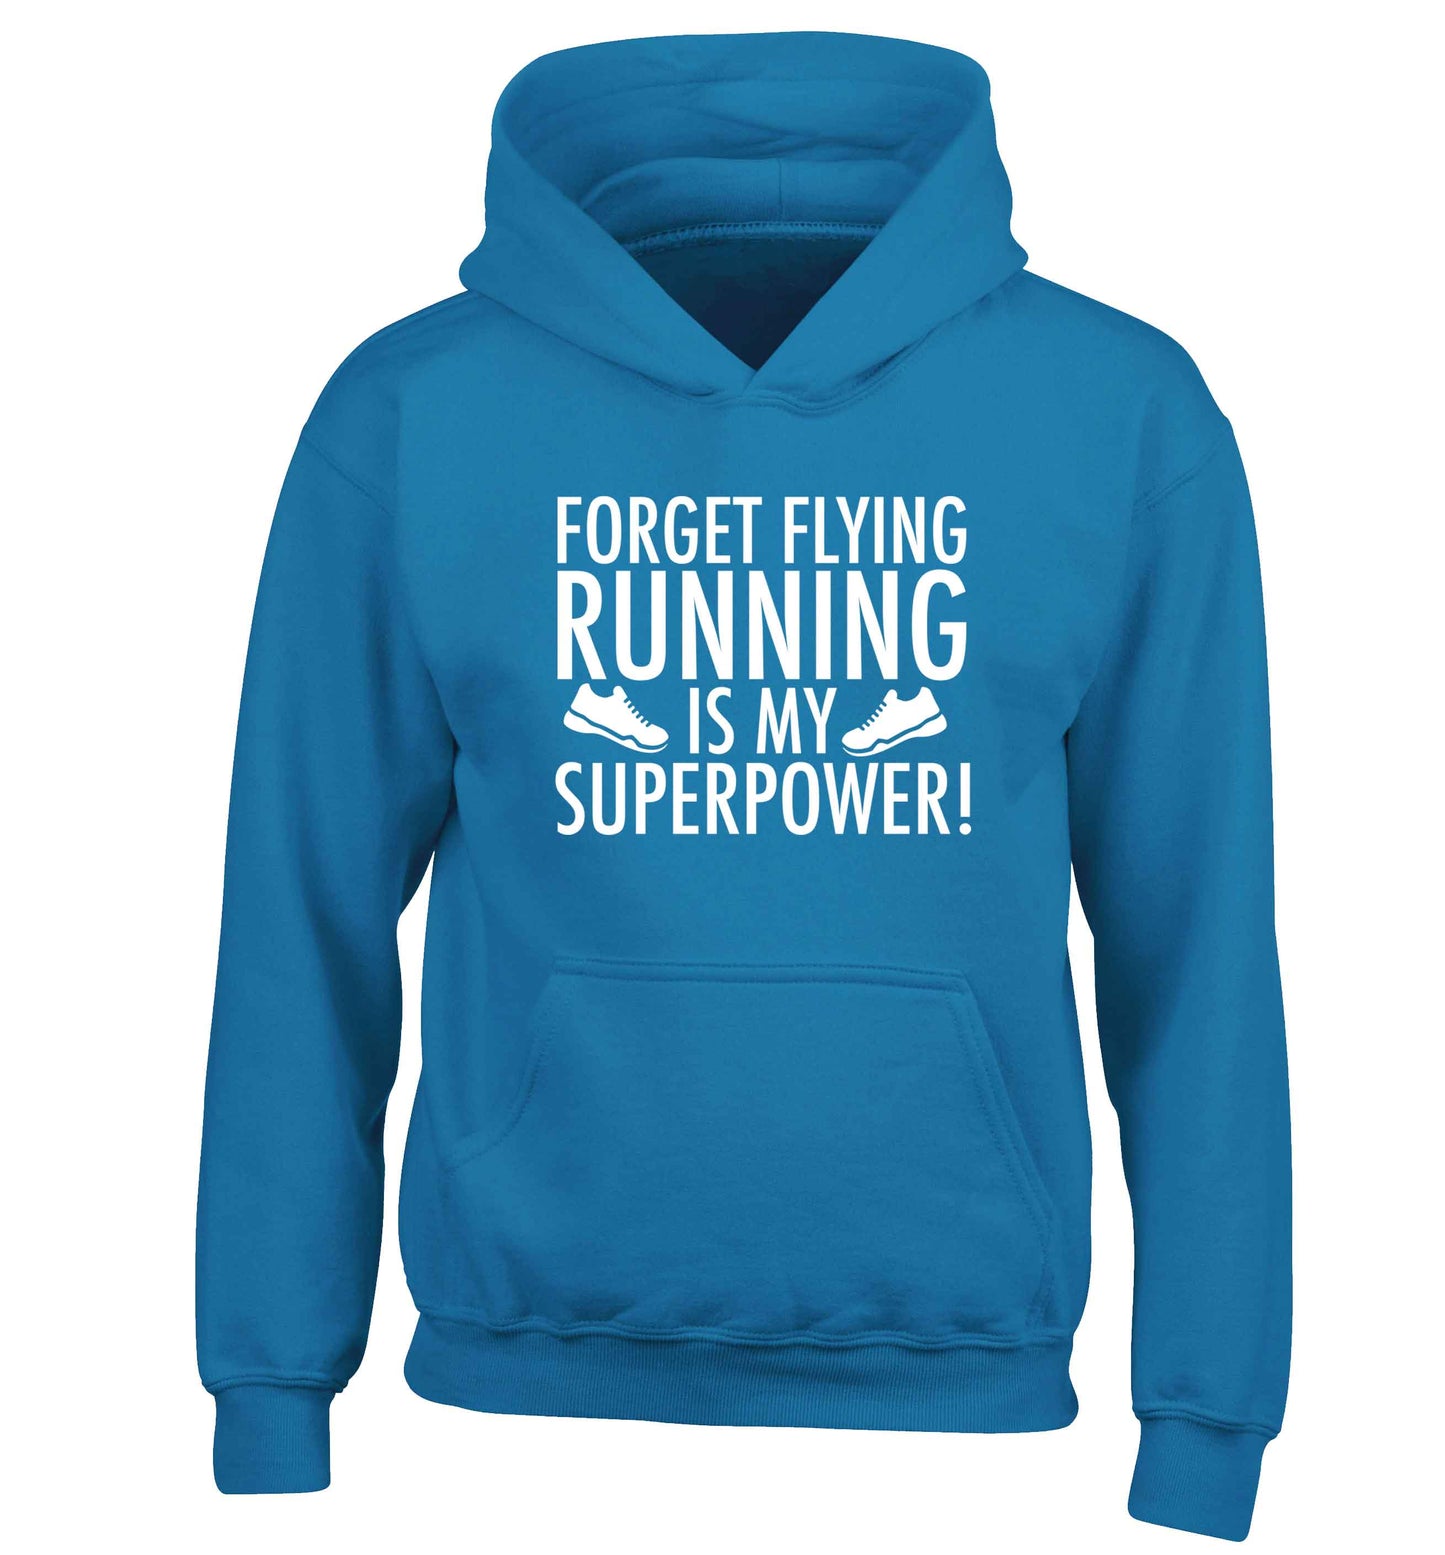 Forget flying running is my superpower children's blue hoodie 12-13 Years